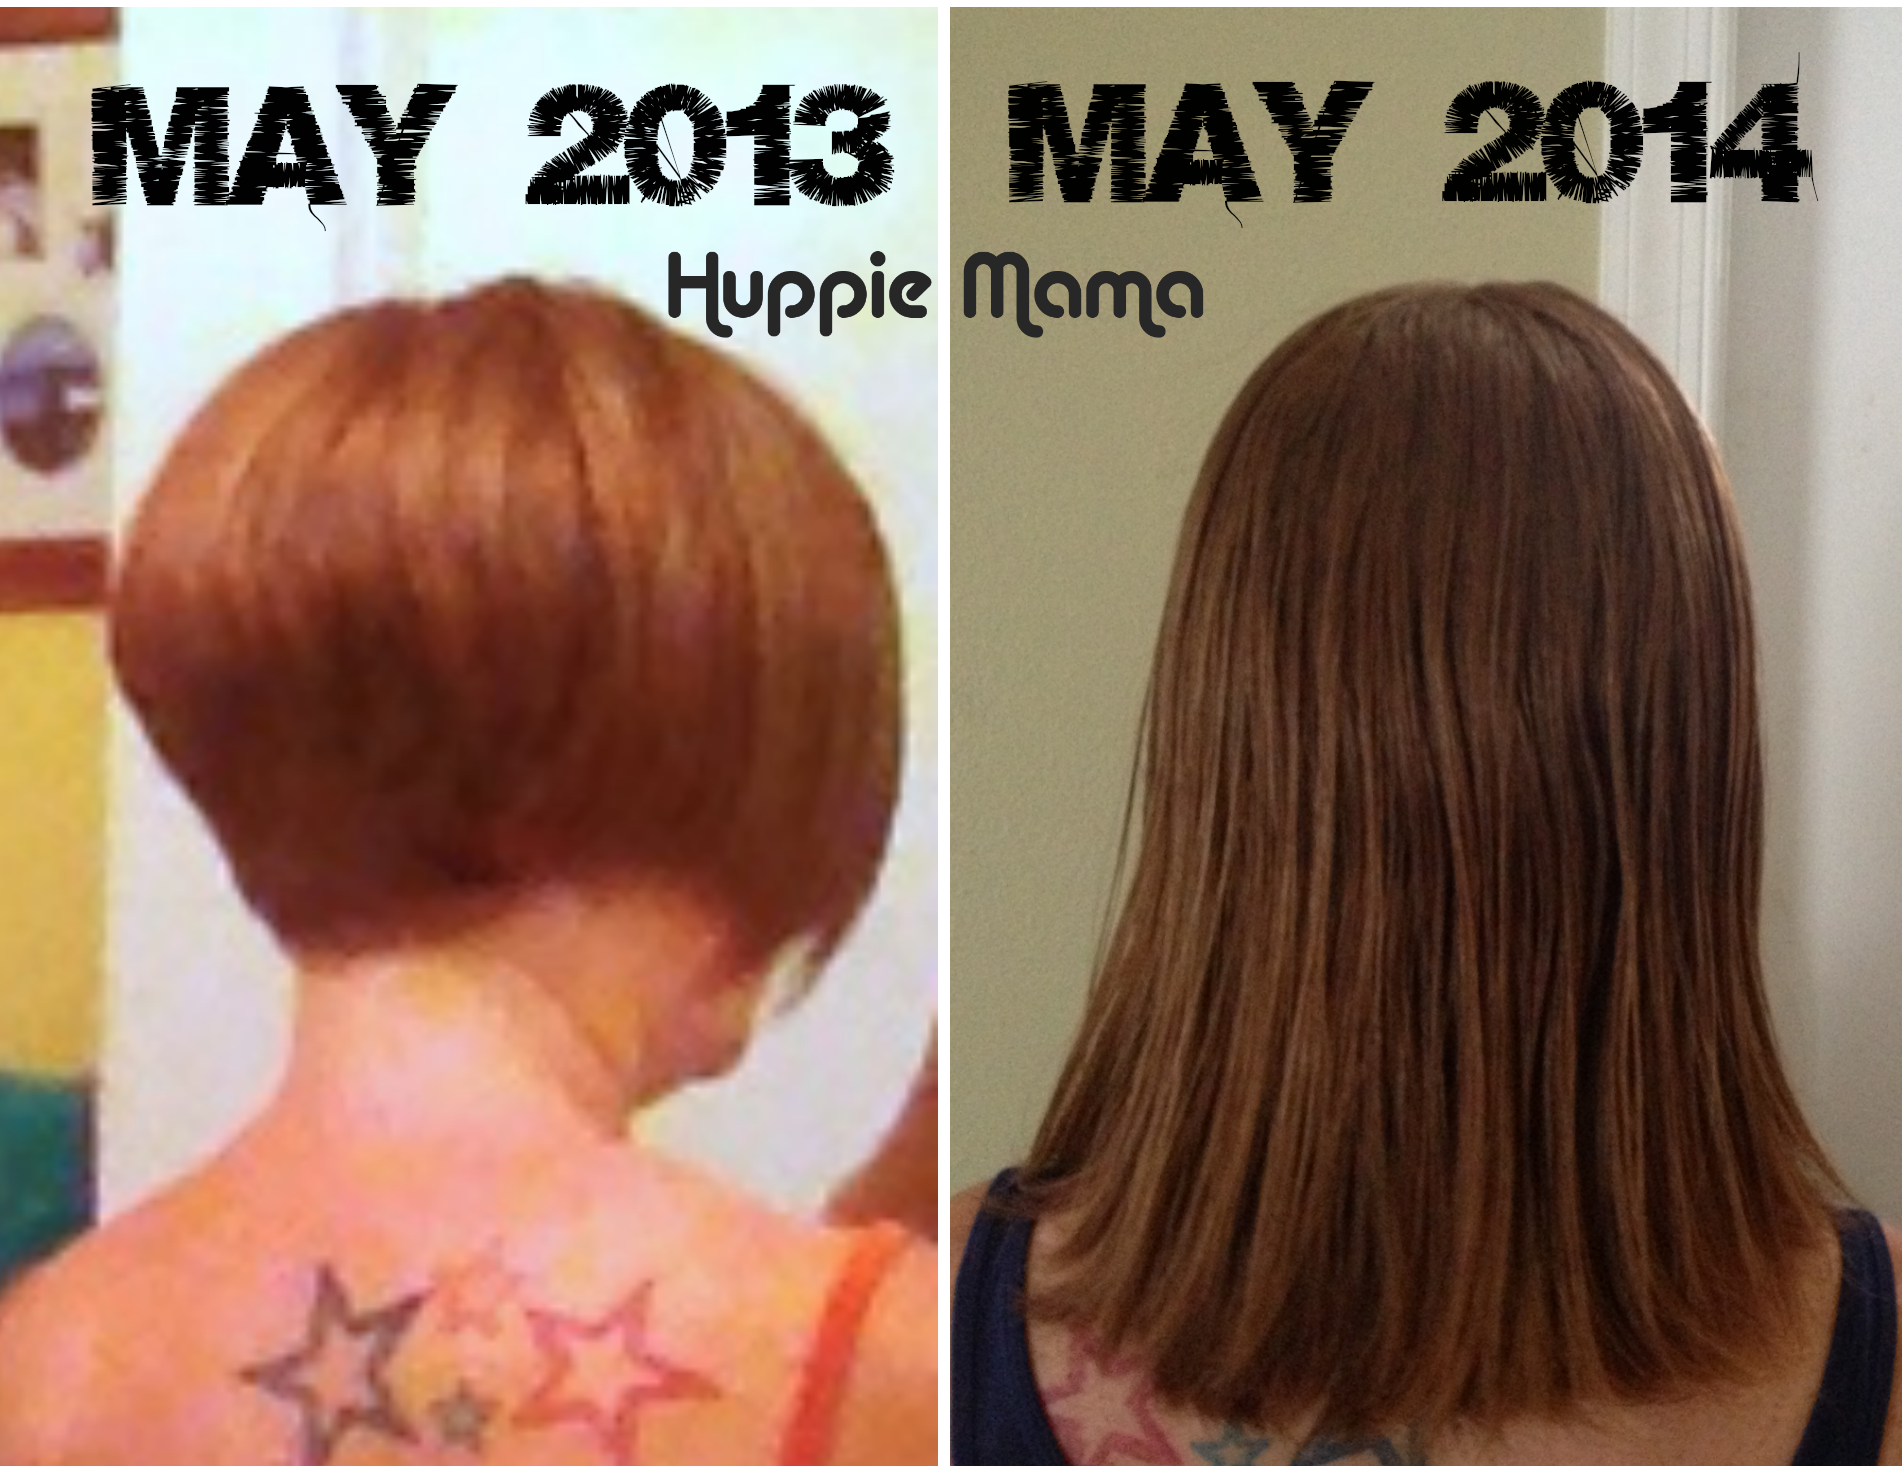 A Year without a Haircut - Huppie Mama